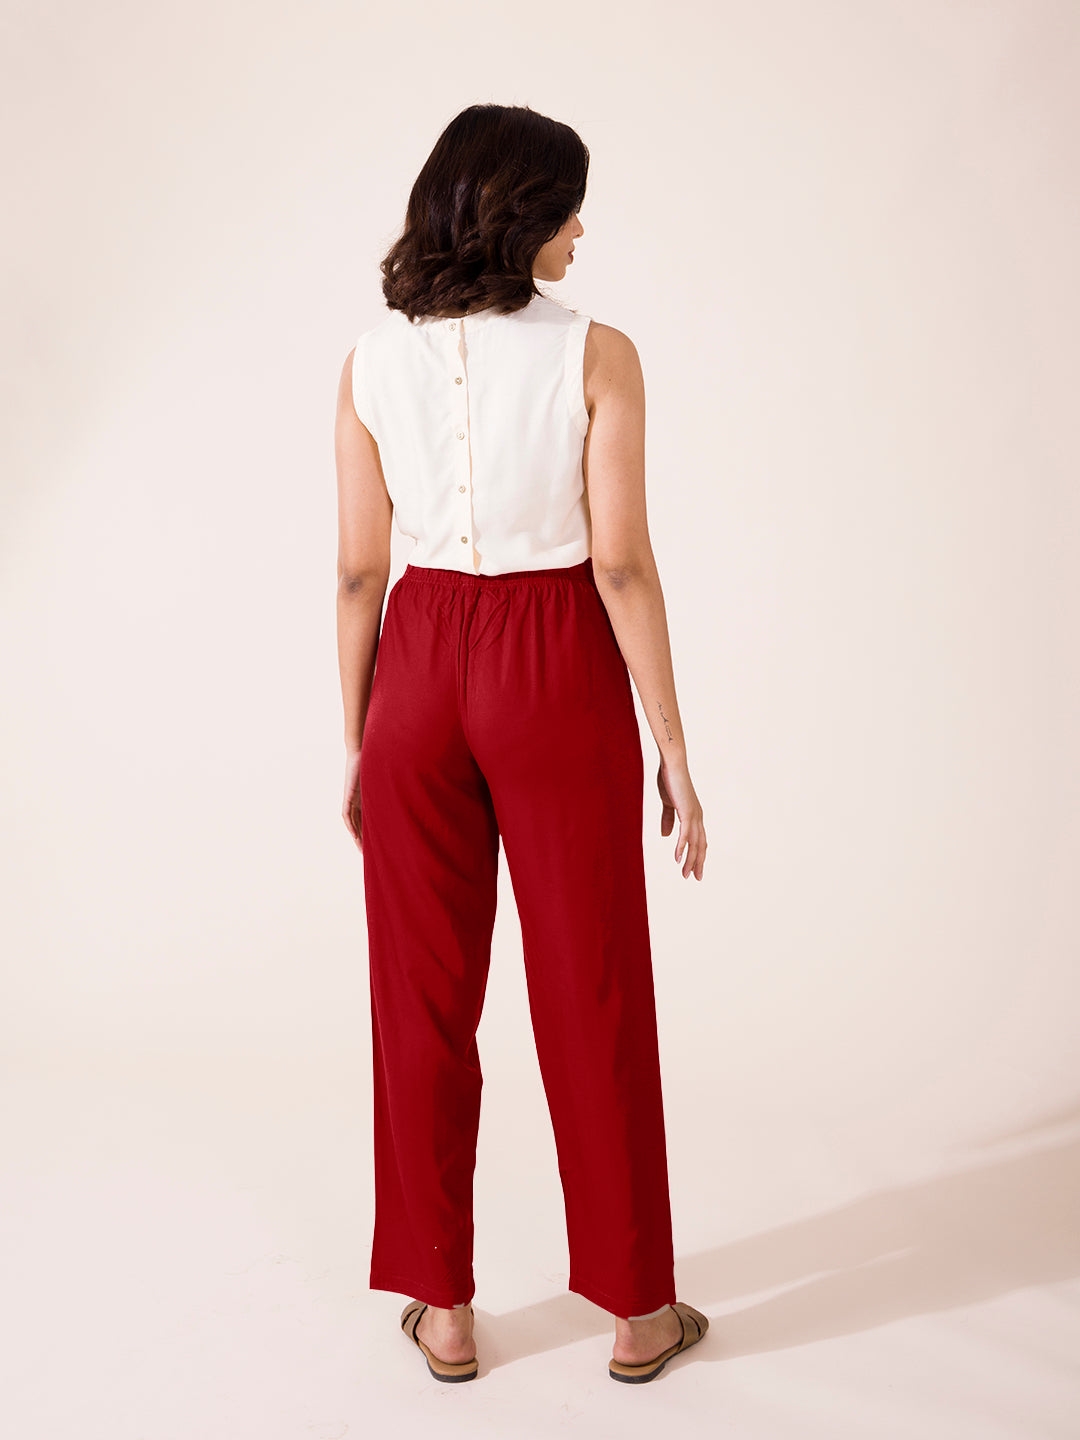 Women Solid Bright Red Viscose Mid Rise Casual Pants